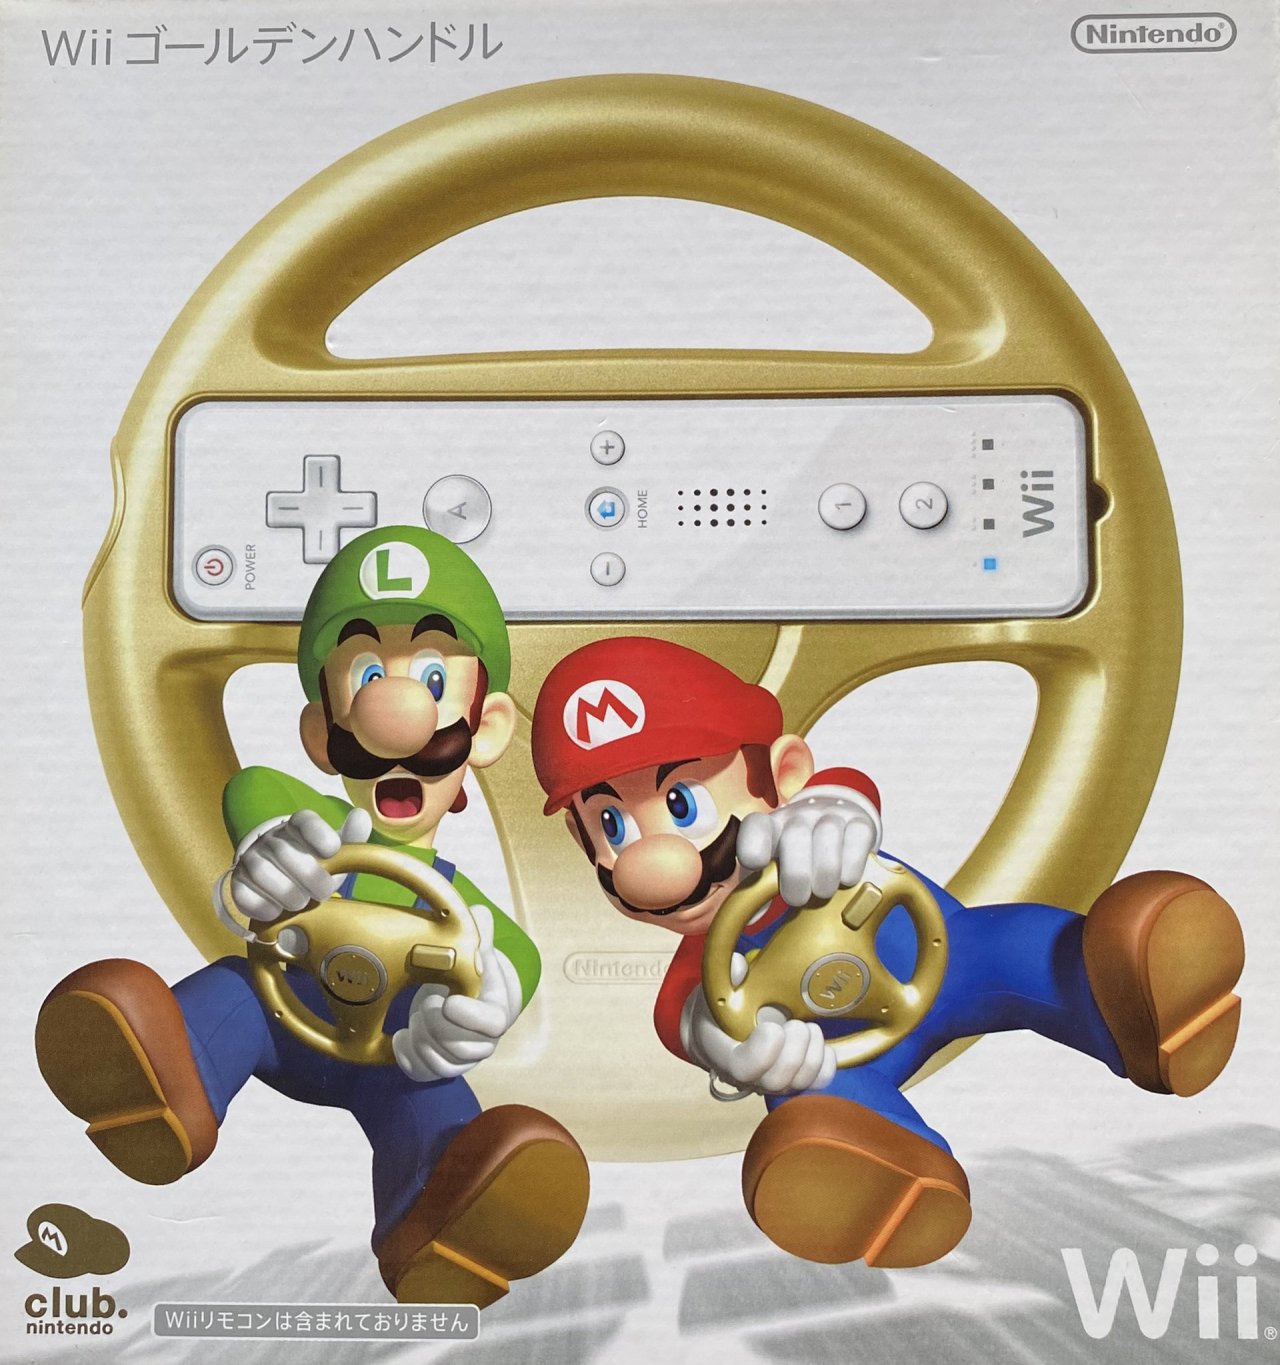 apt Fremragende Gavmild Small Mario Findings — Golden Wii Wheel available from the Japanese Club...